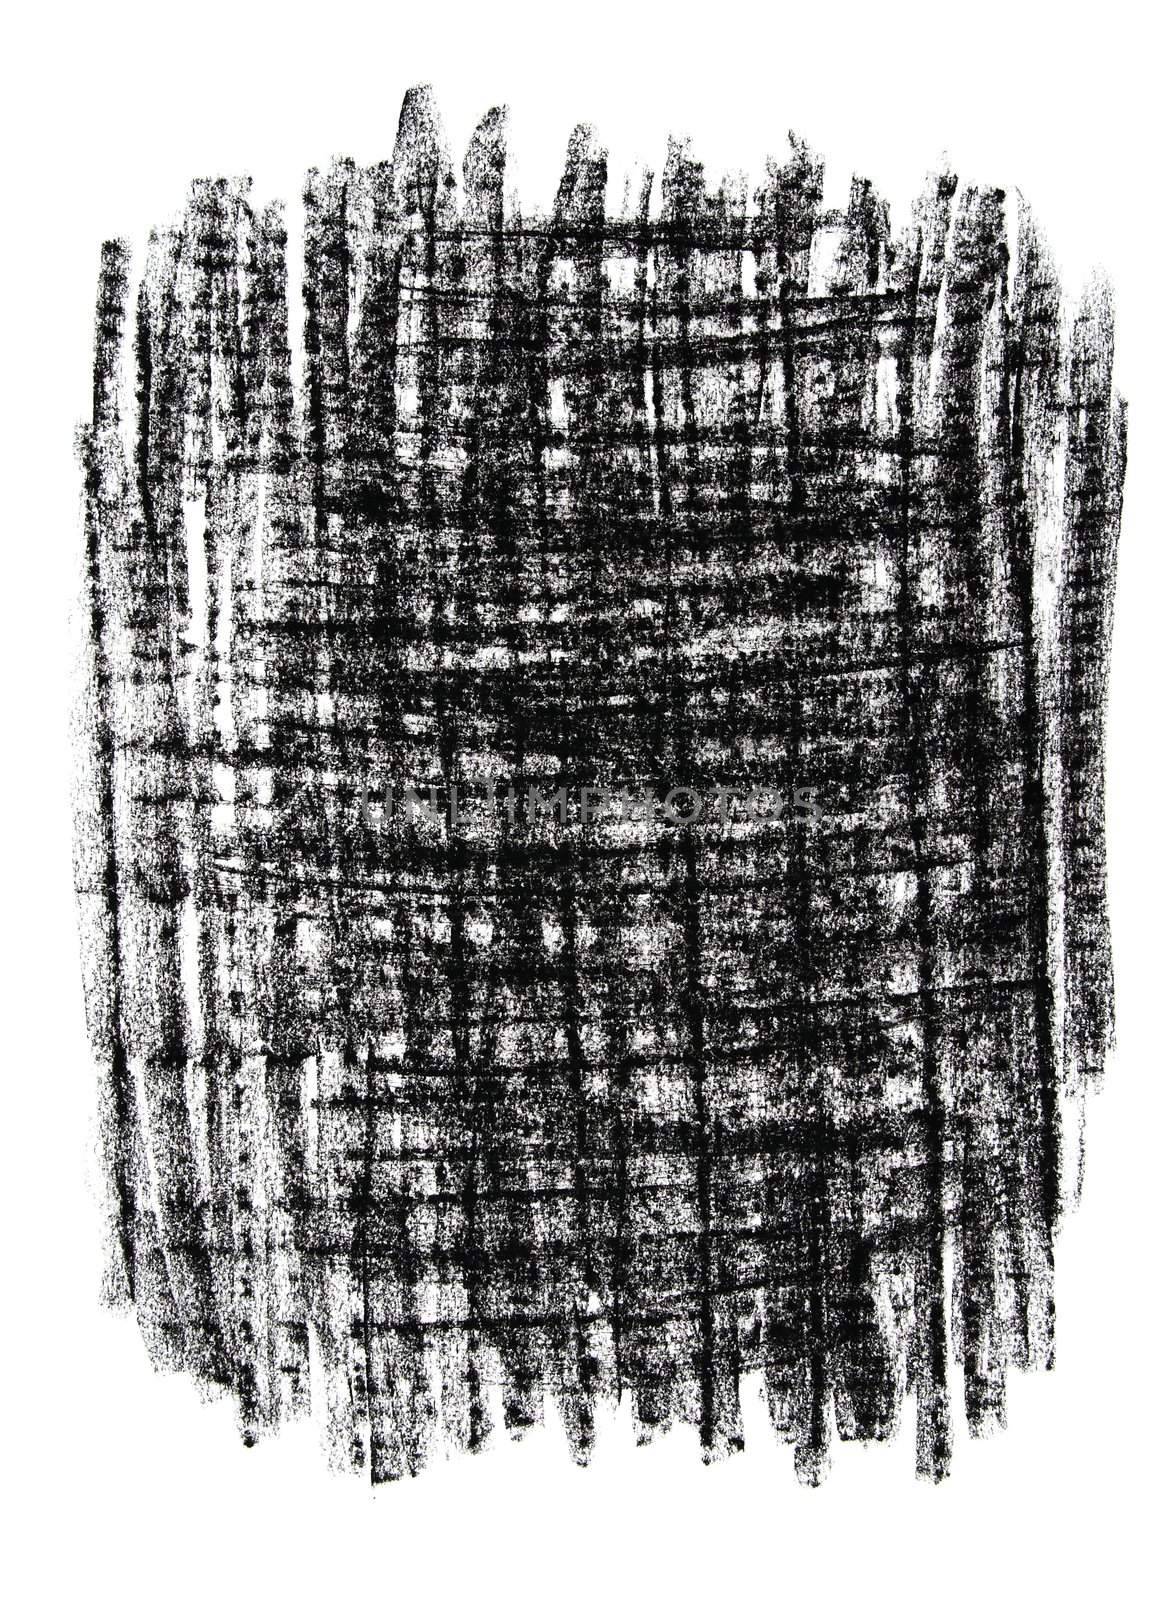 Black textured grungy background drawn with charcoal.